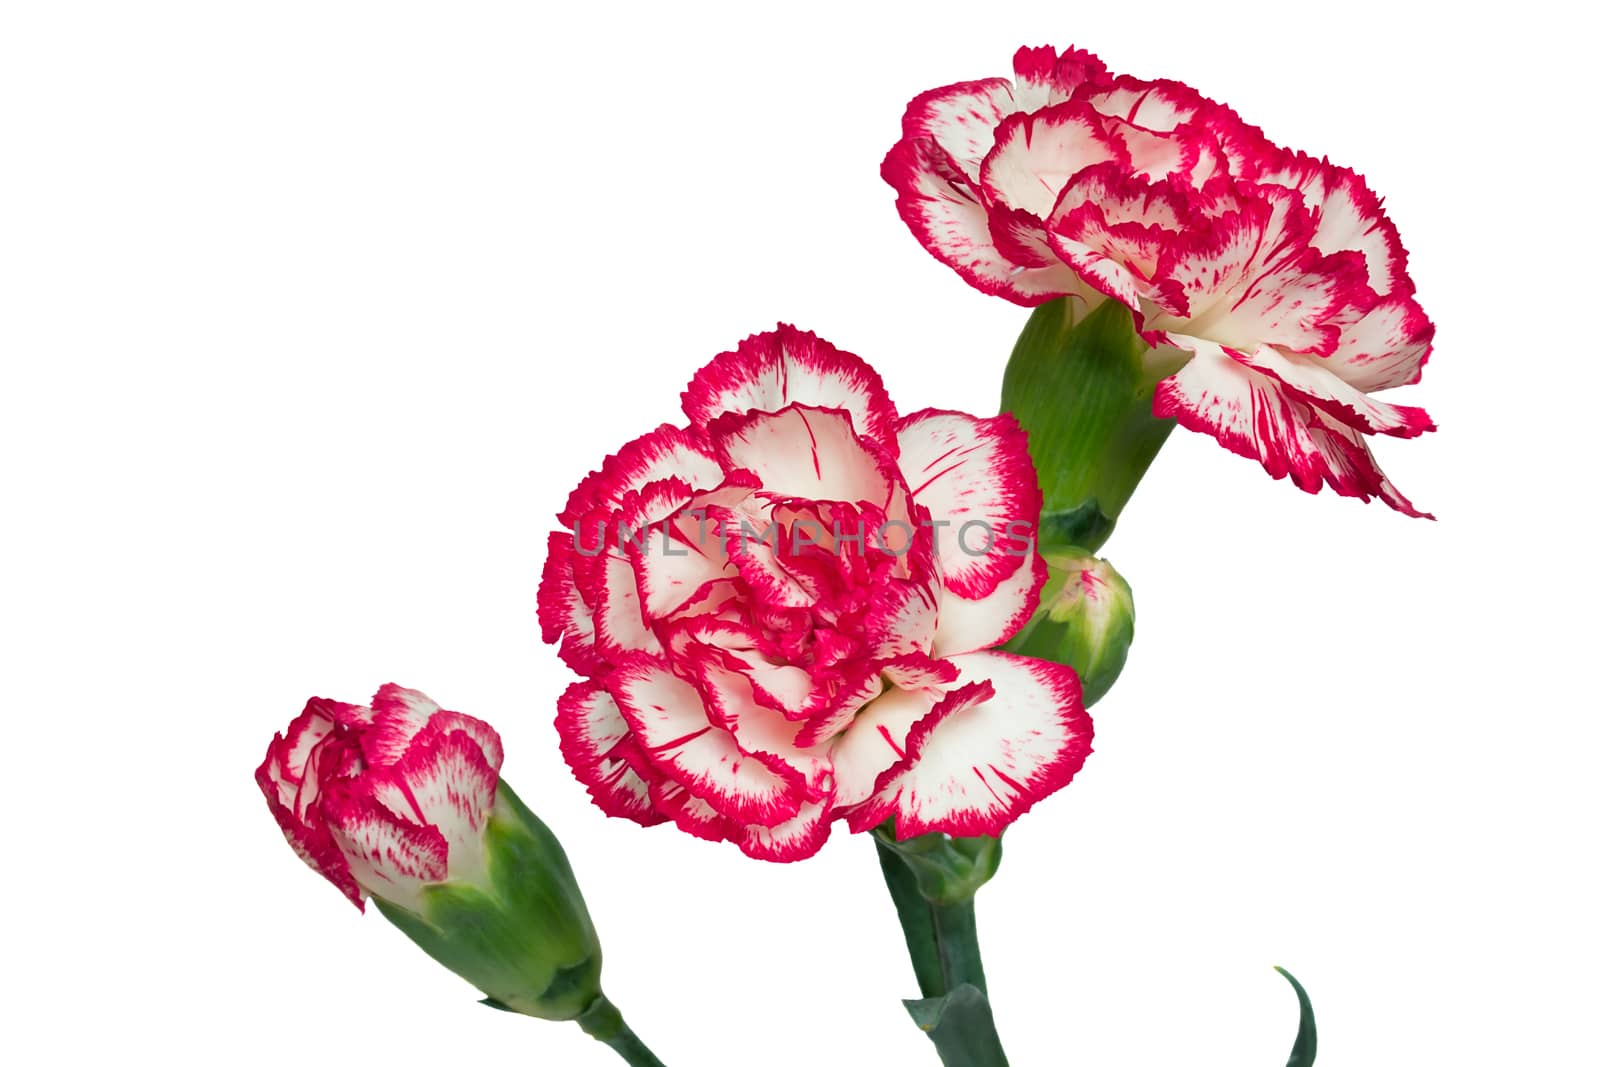 
Beautiful flowers are pink with a white carnation , buds and petals. Presented on a white background.
